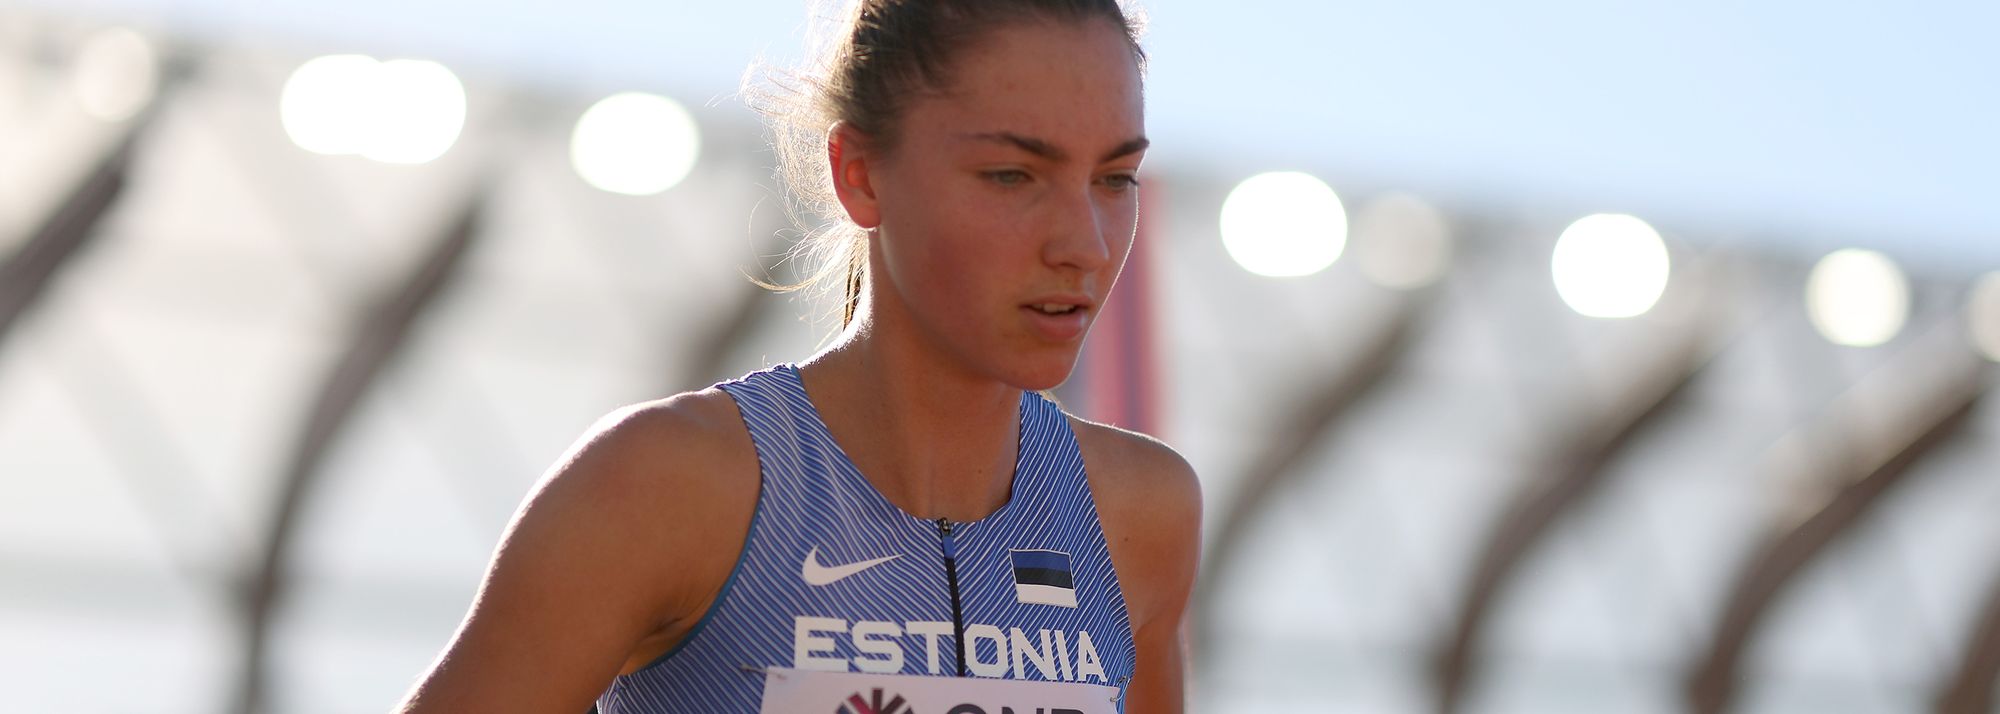 Karmen Bruus has matched the Estonian high jump record and world U18 best already this year and now she returns to the global stage at the World Athletics Championships Cali 22